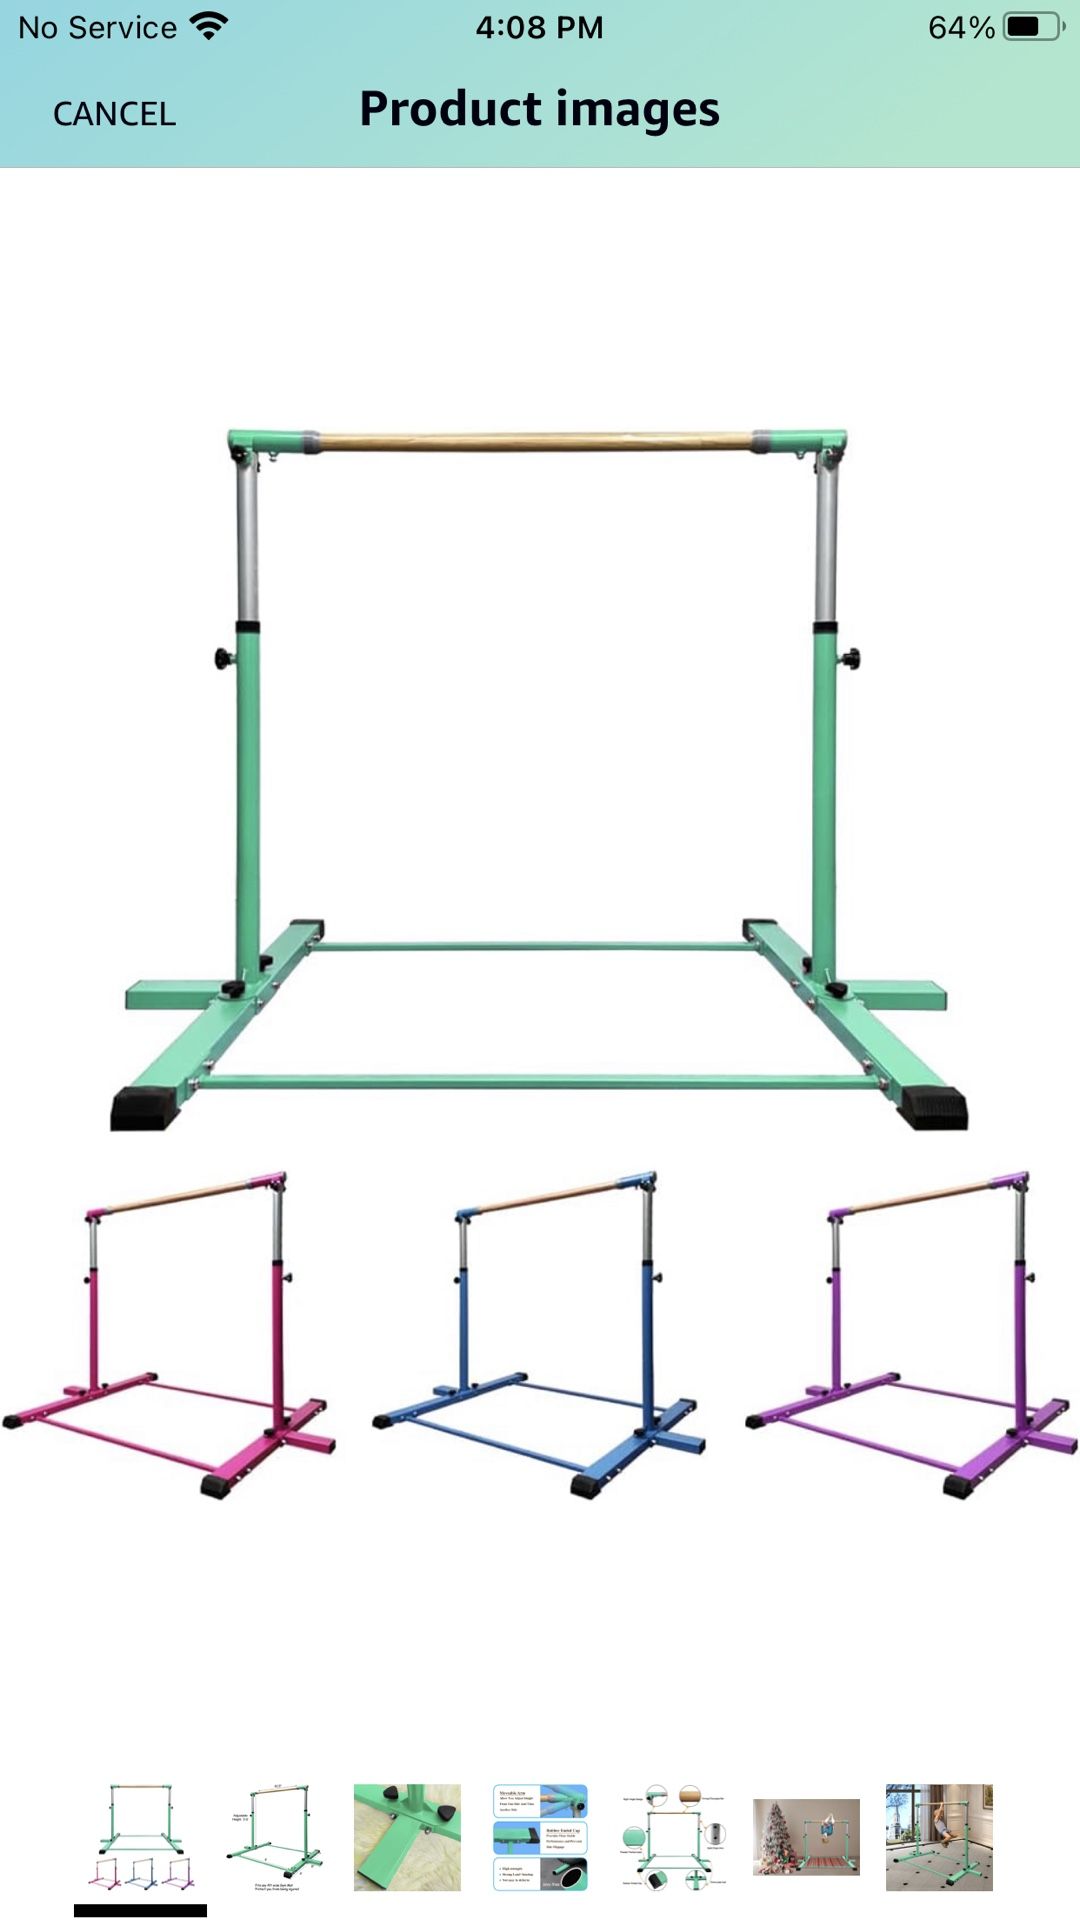 Gymnastic Kip Bar,Horizontal Bar for Kids Girls Junior,3' to 5' Adjustable Height,Home Gym Equipment,Ideal for Indoor and Home Training,1-4 Levels,300